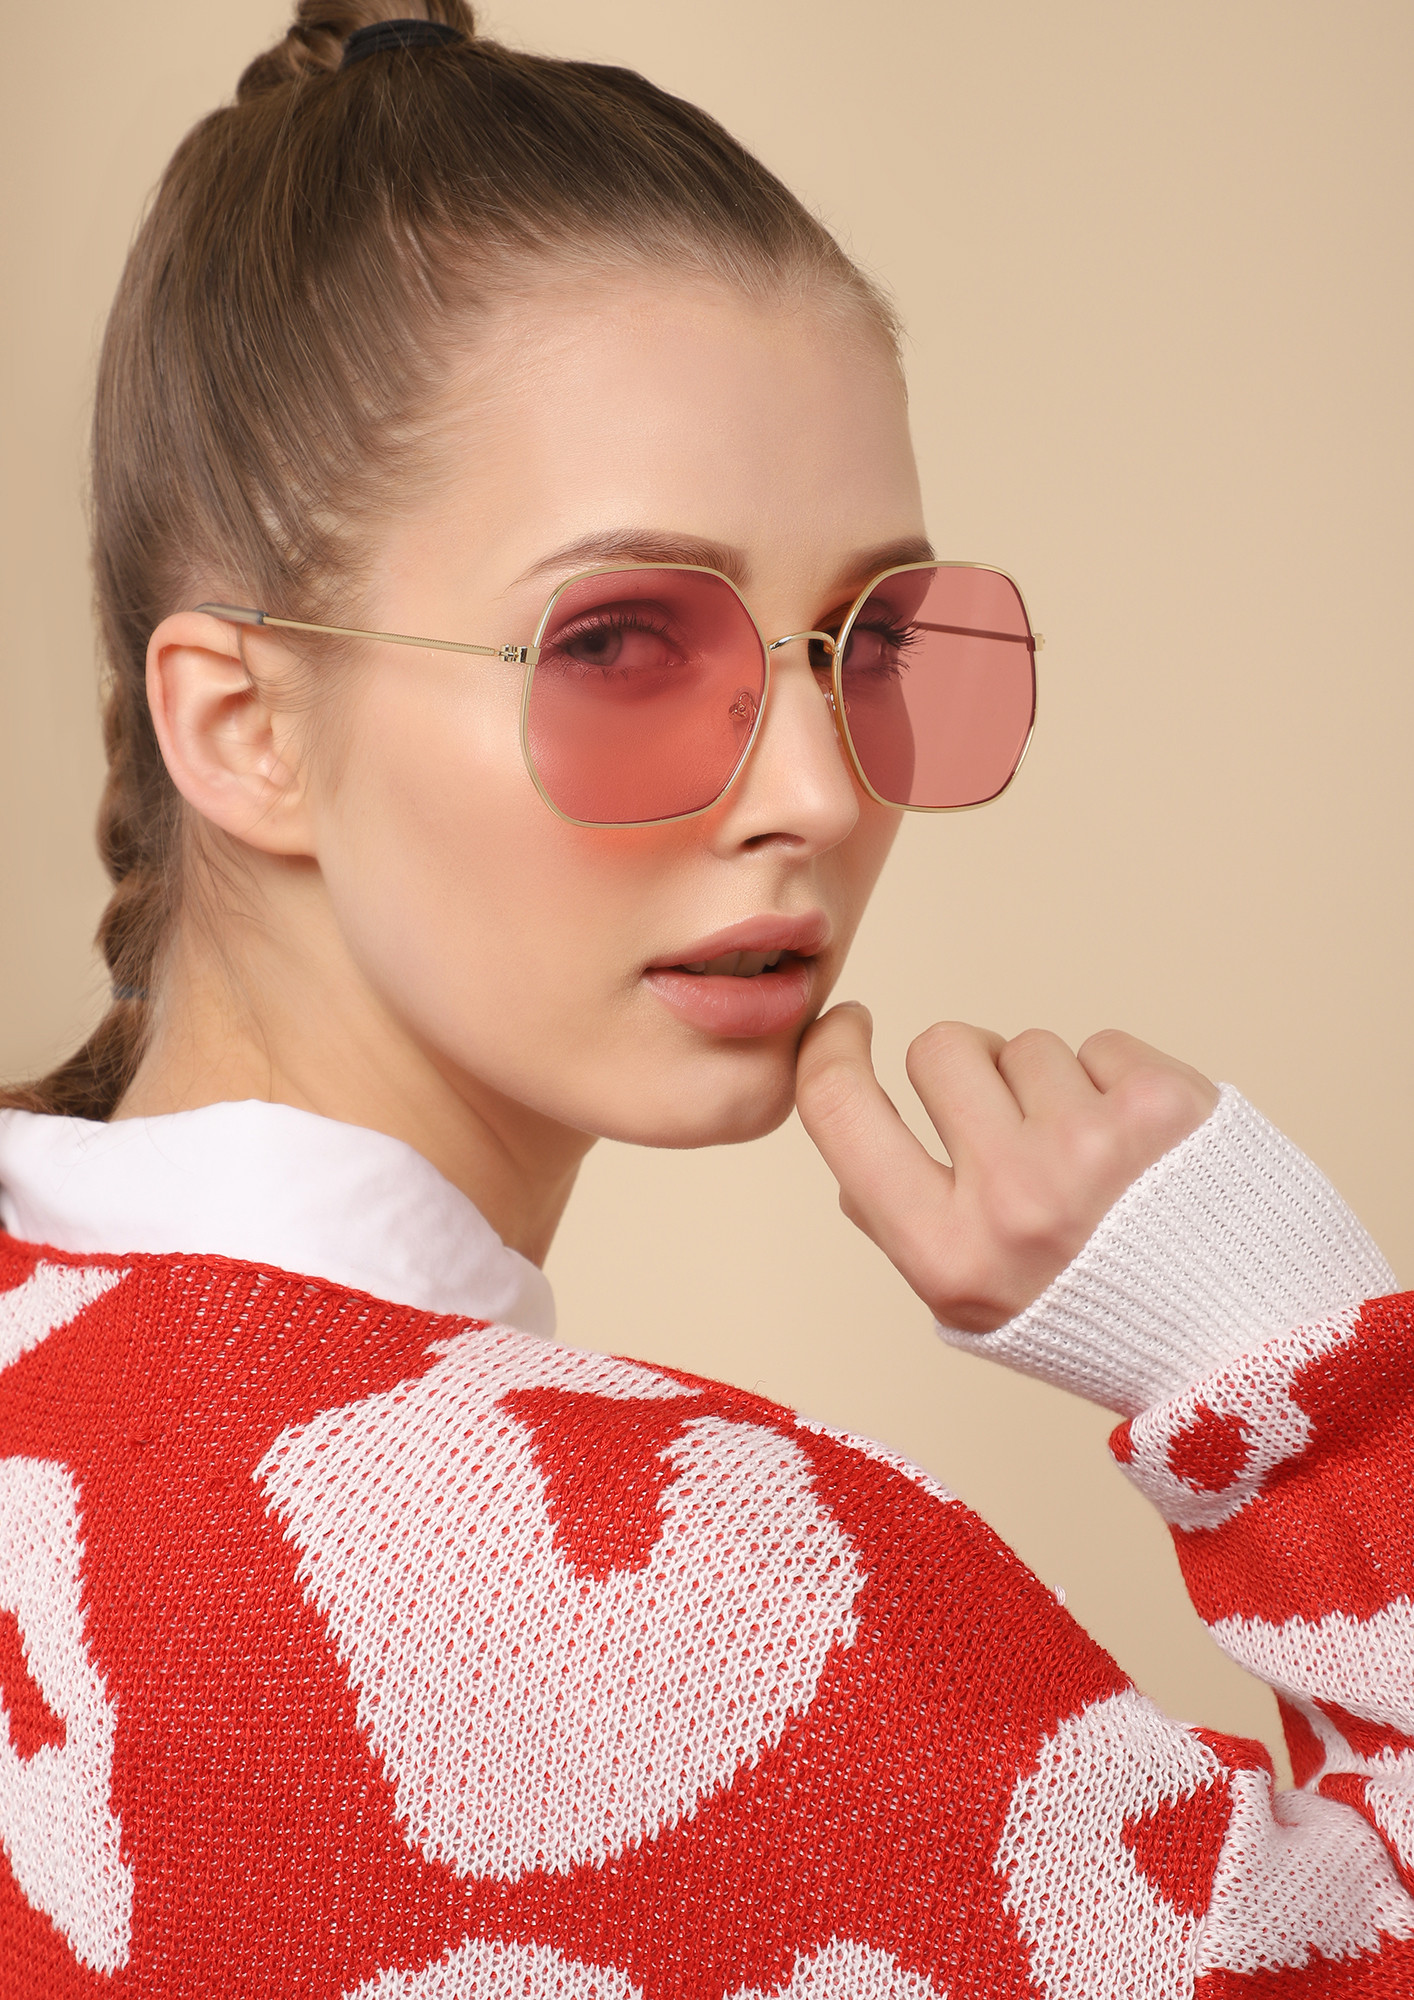 FOR OLD TIMES SAKE PINK RETRO SUNGLASSES